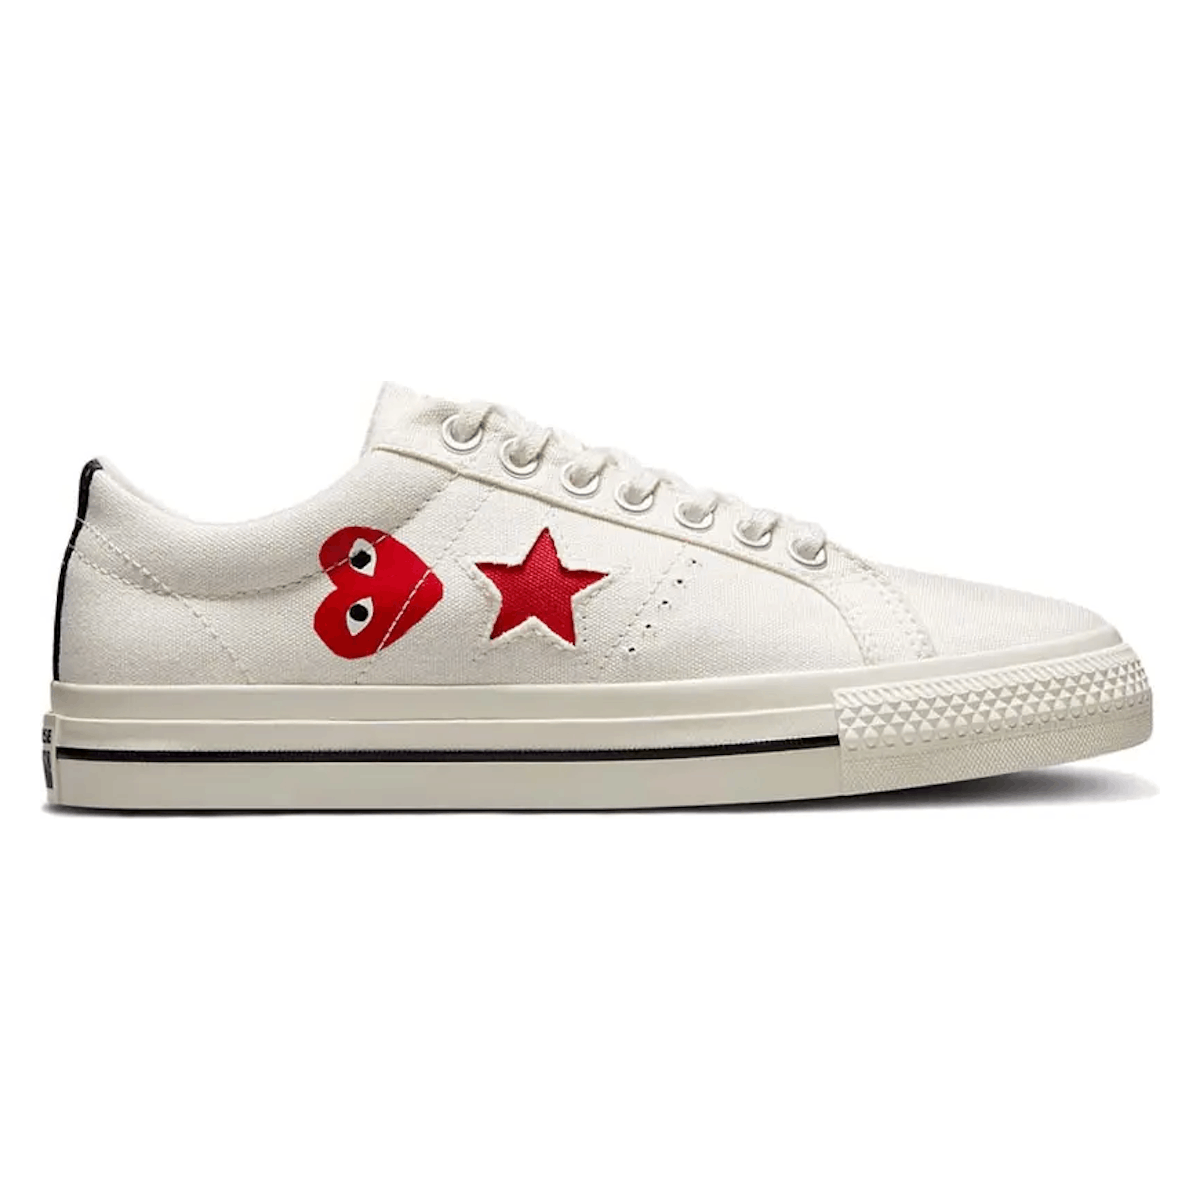 Comme des Garcons Play x Converse One Star Low "White"